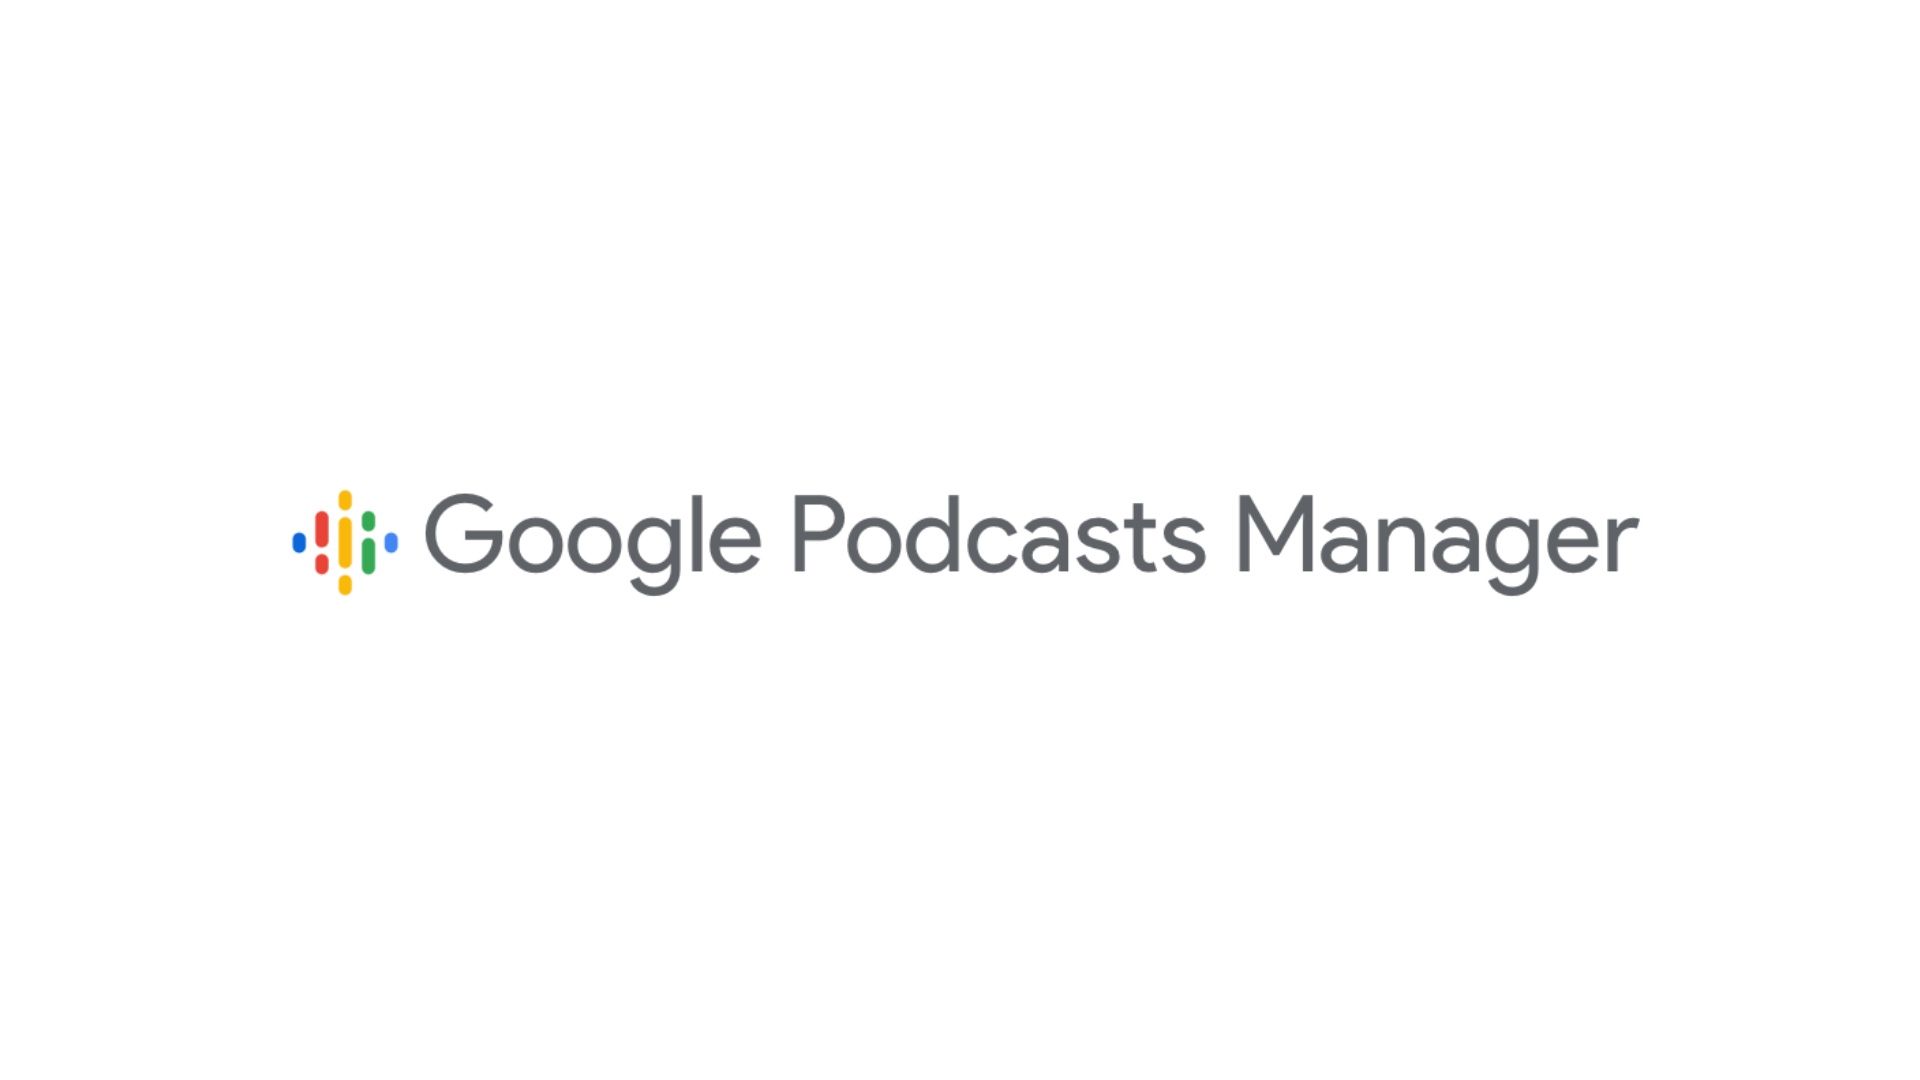 Google provides SEO guidelines for podcasts